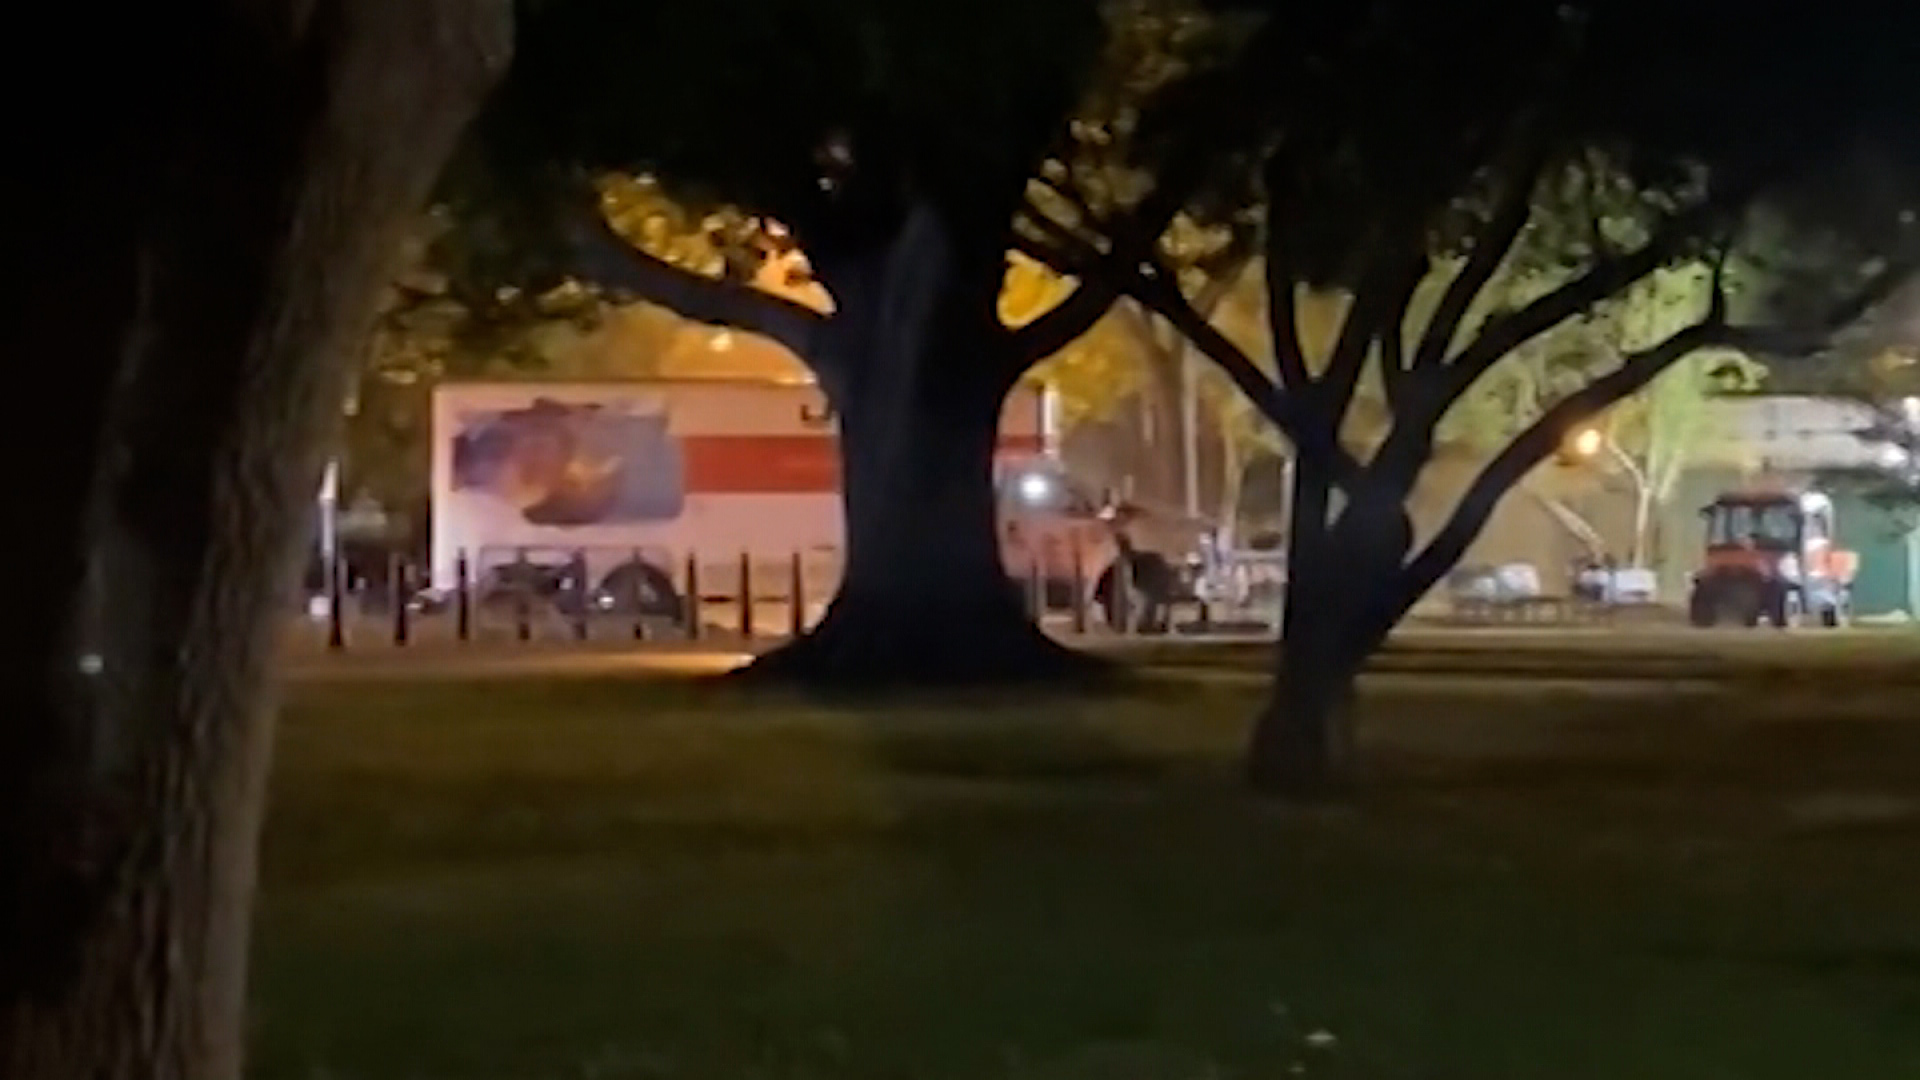 The driver of a U-Haul who crashed into a security barrier in Lafayette Square near the White House Monday night was arrested on multiple charges.